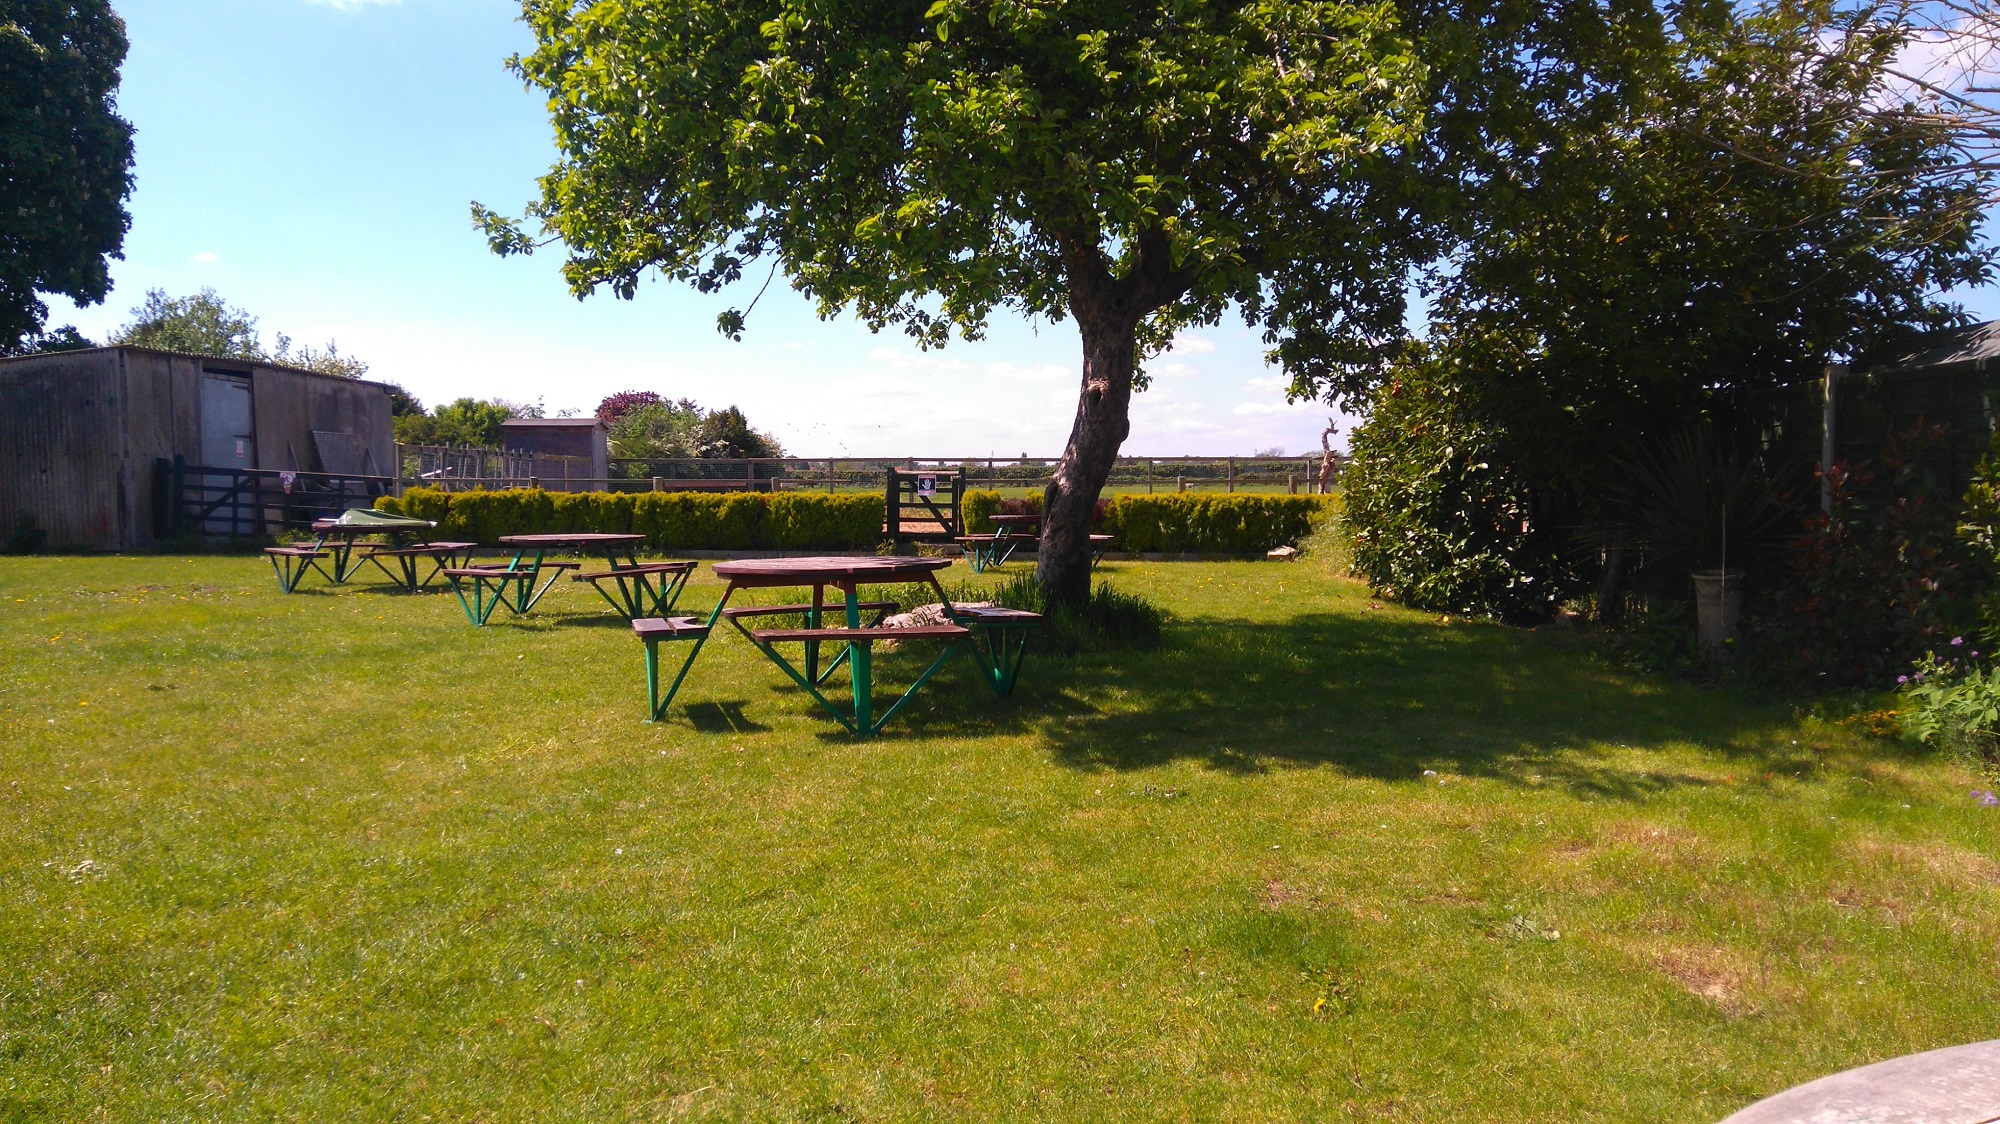 Pub garden table chairs sunny tree grass